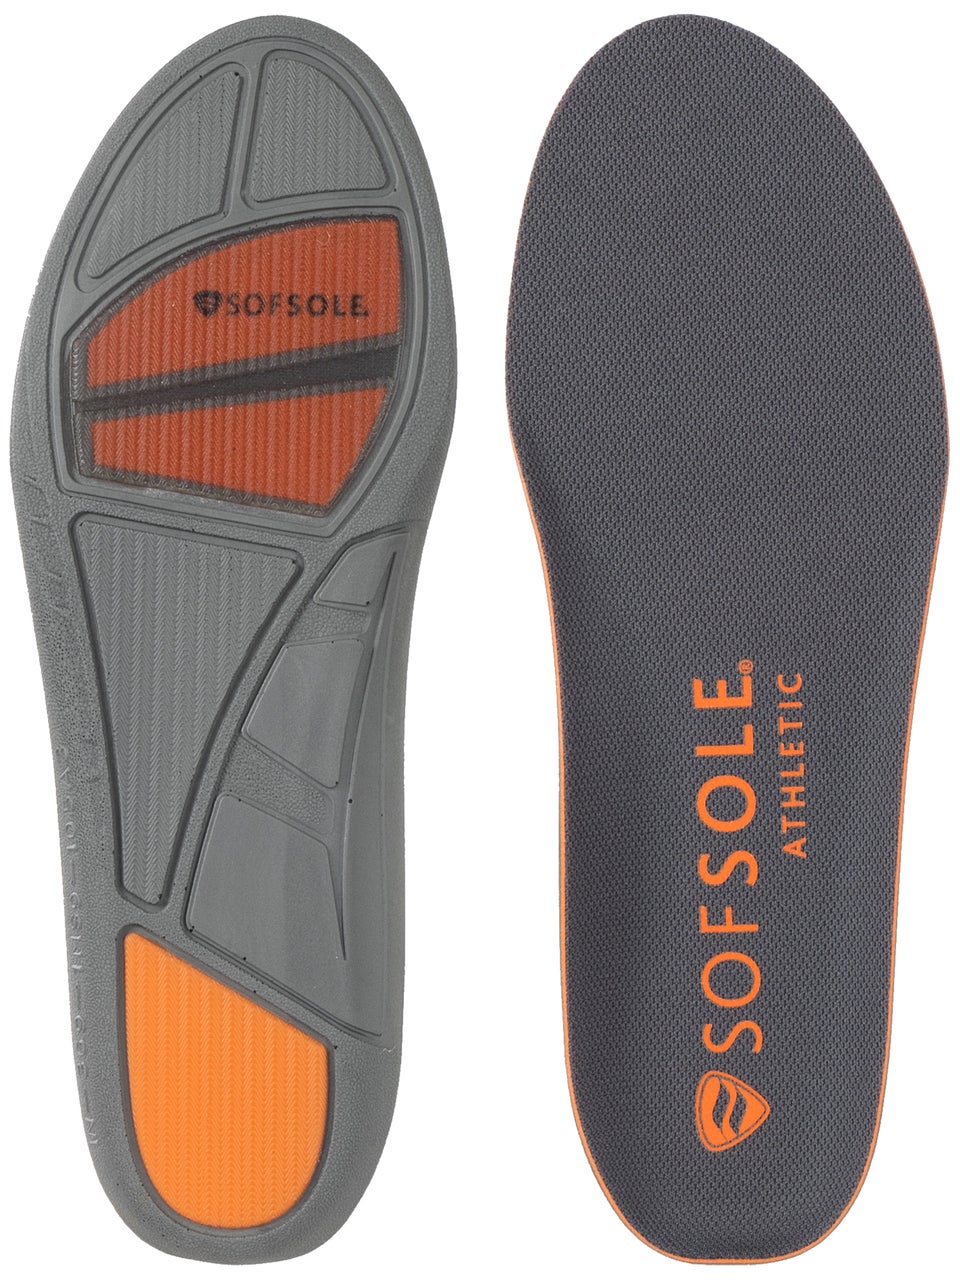 Sof Sole Athletic Men's Insoles | Running Warehouse